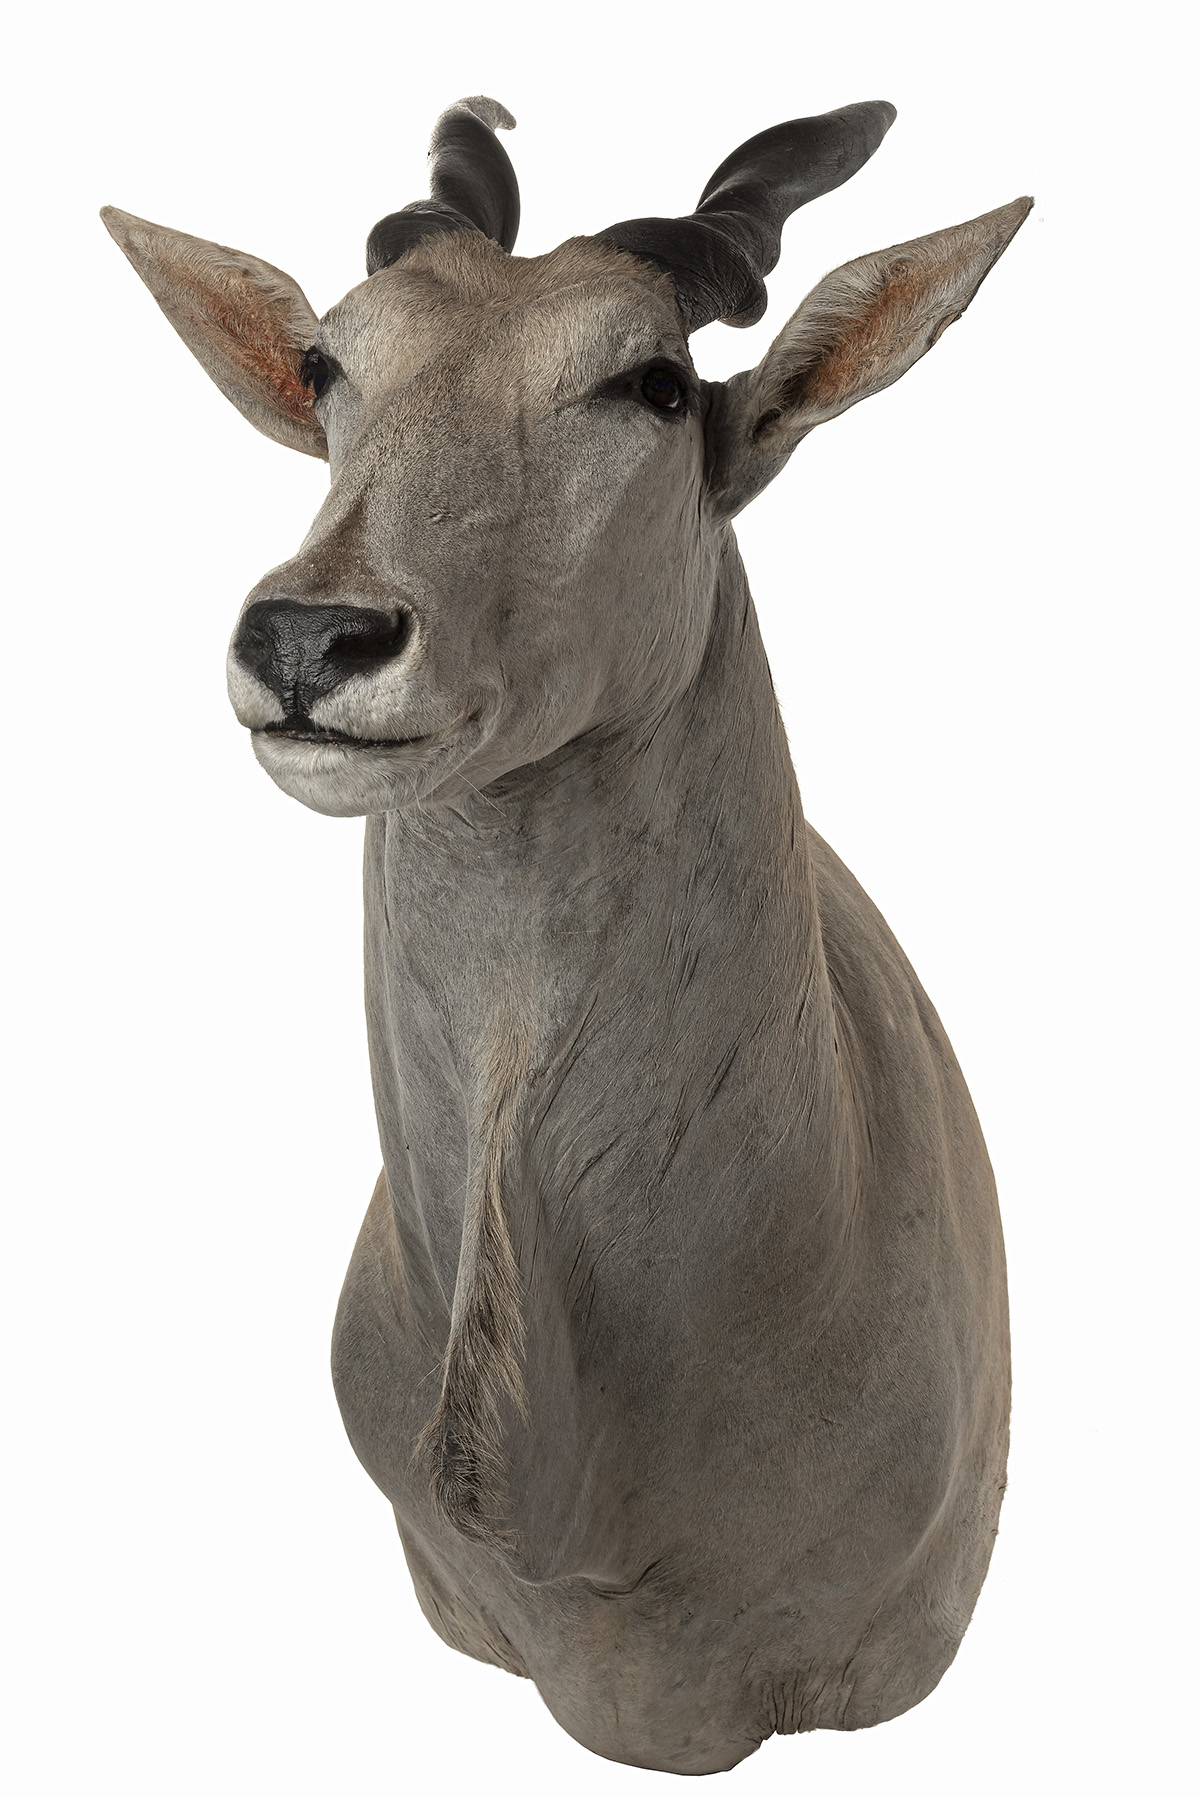 WILLIAM MATHEWS A FINE CAPE AND HEAD MOUNT OF AN ELAND (Taurotragus oryx), with approx. 25in. horns. - Image 2 of 2